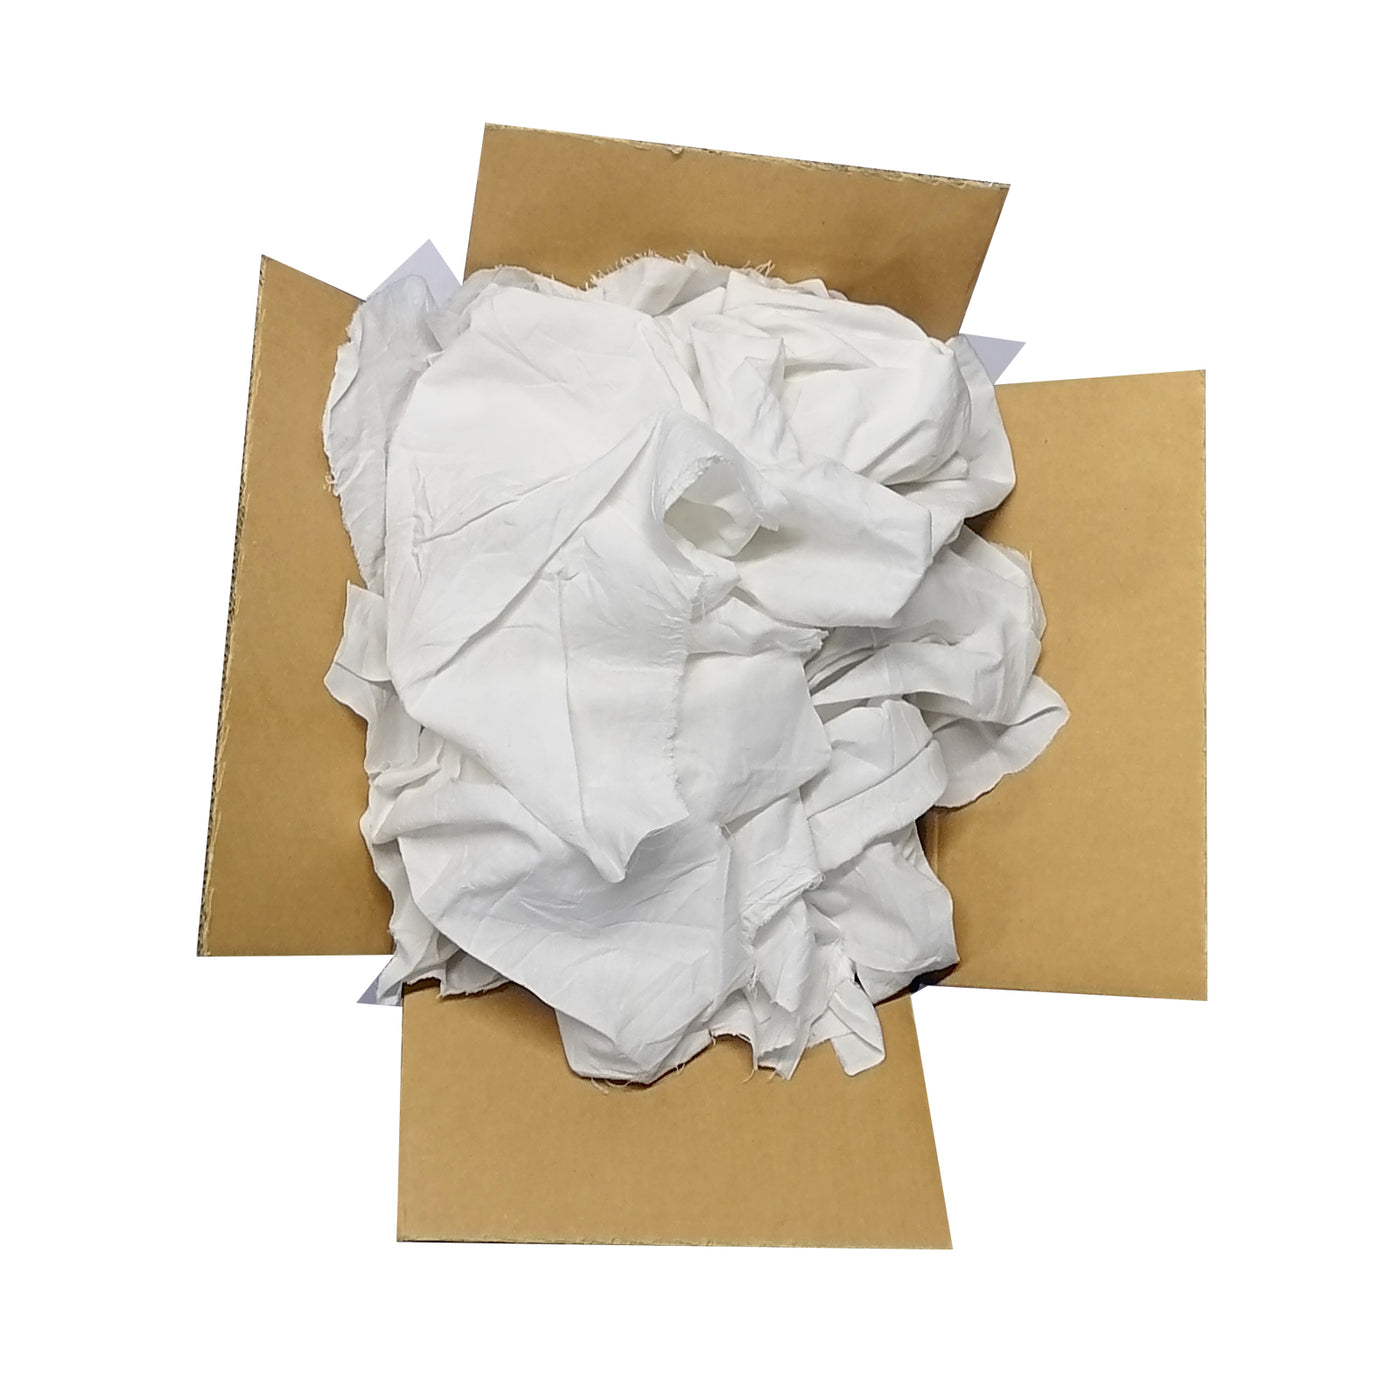 A&A Wiping Cloth- Recycled Cut White Sheeting Rags, Strong & Absorbent  Cleaning Rags for All Clean-up Purposes, 10 Pound Box